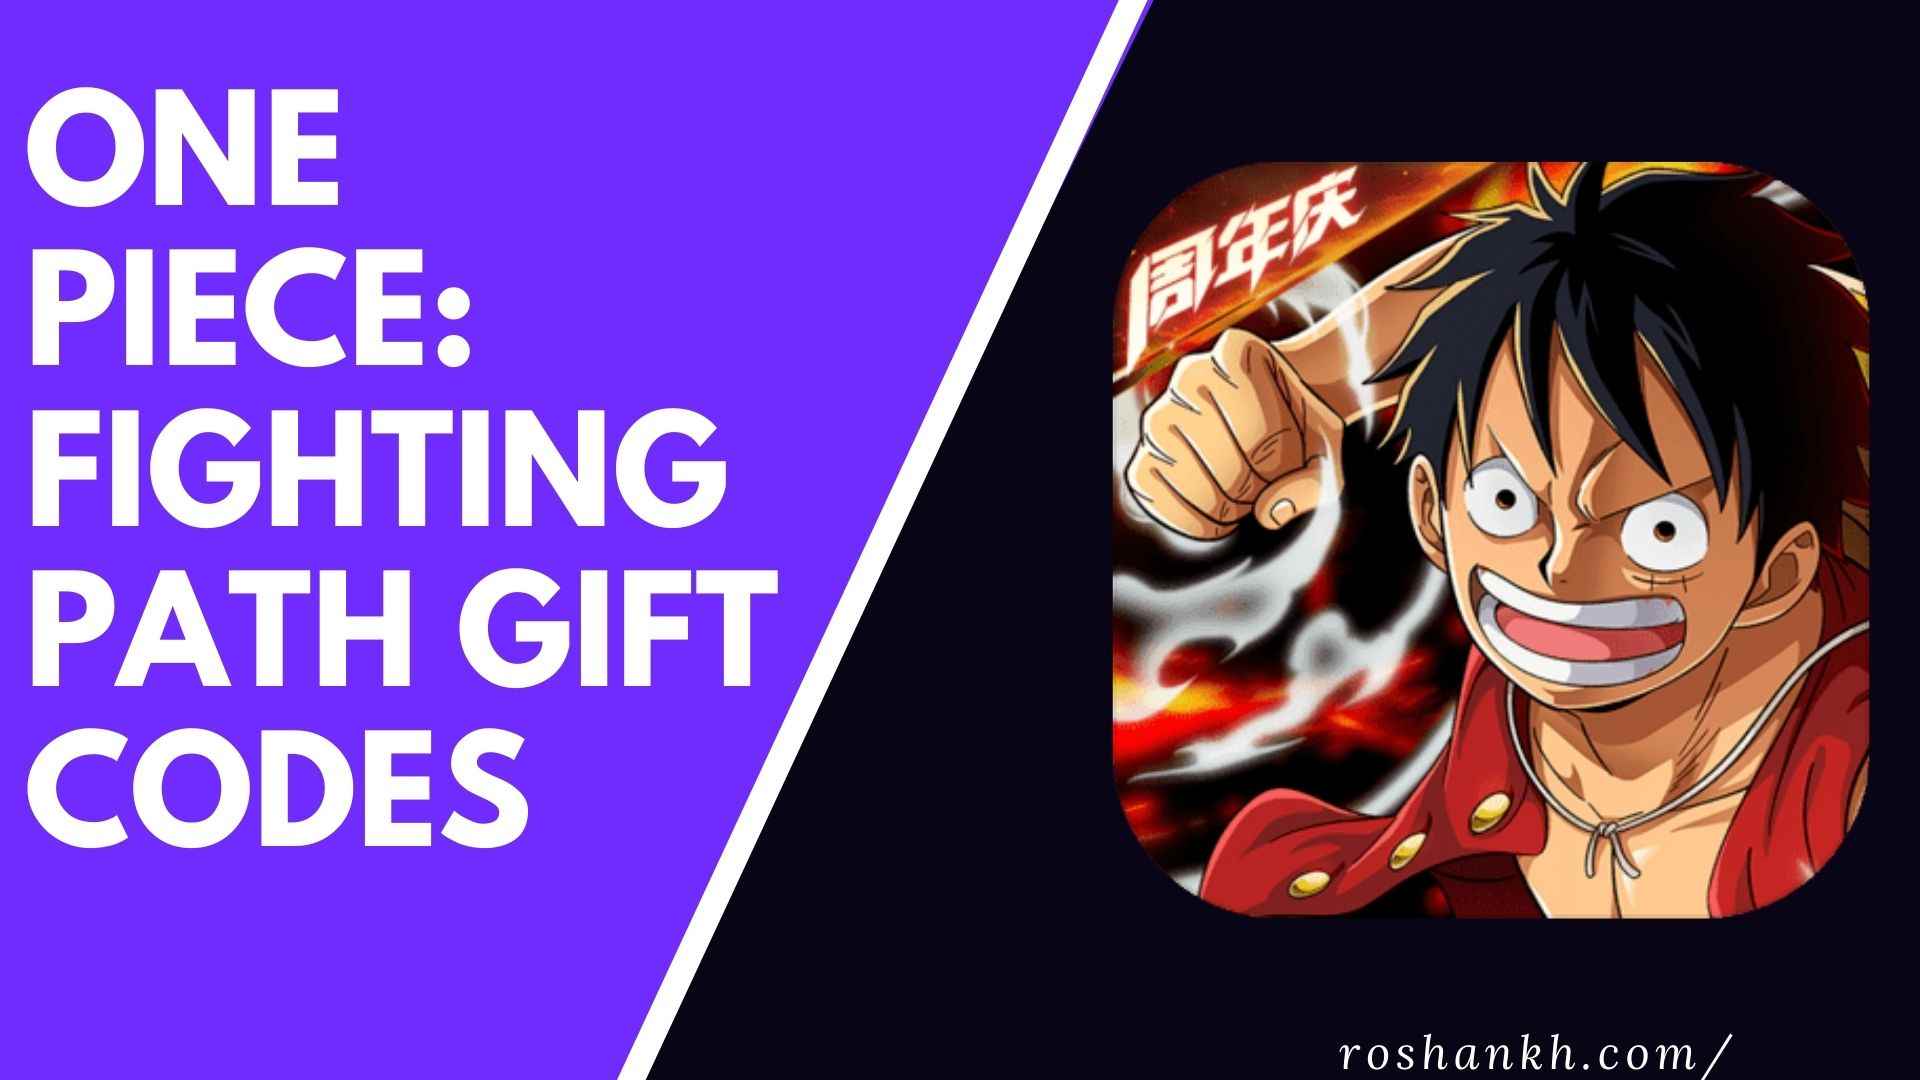 One Piece: Fighting Path Gift Codes